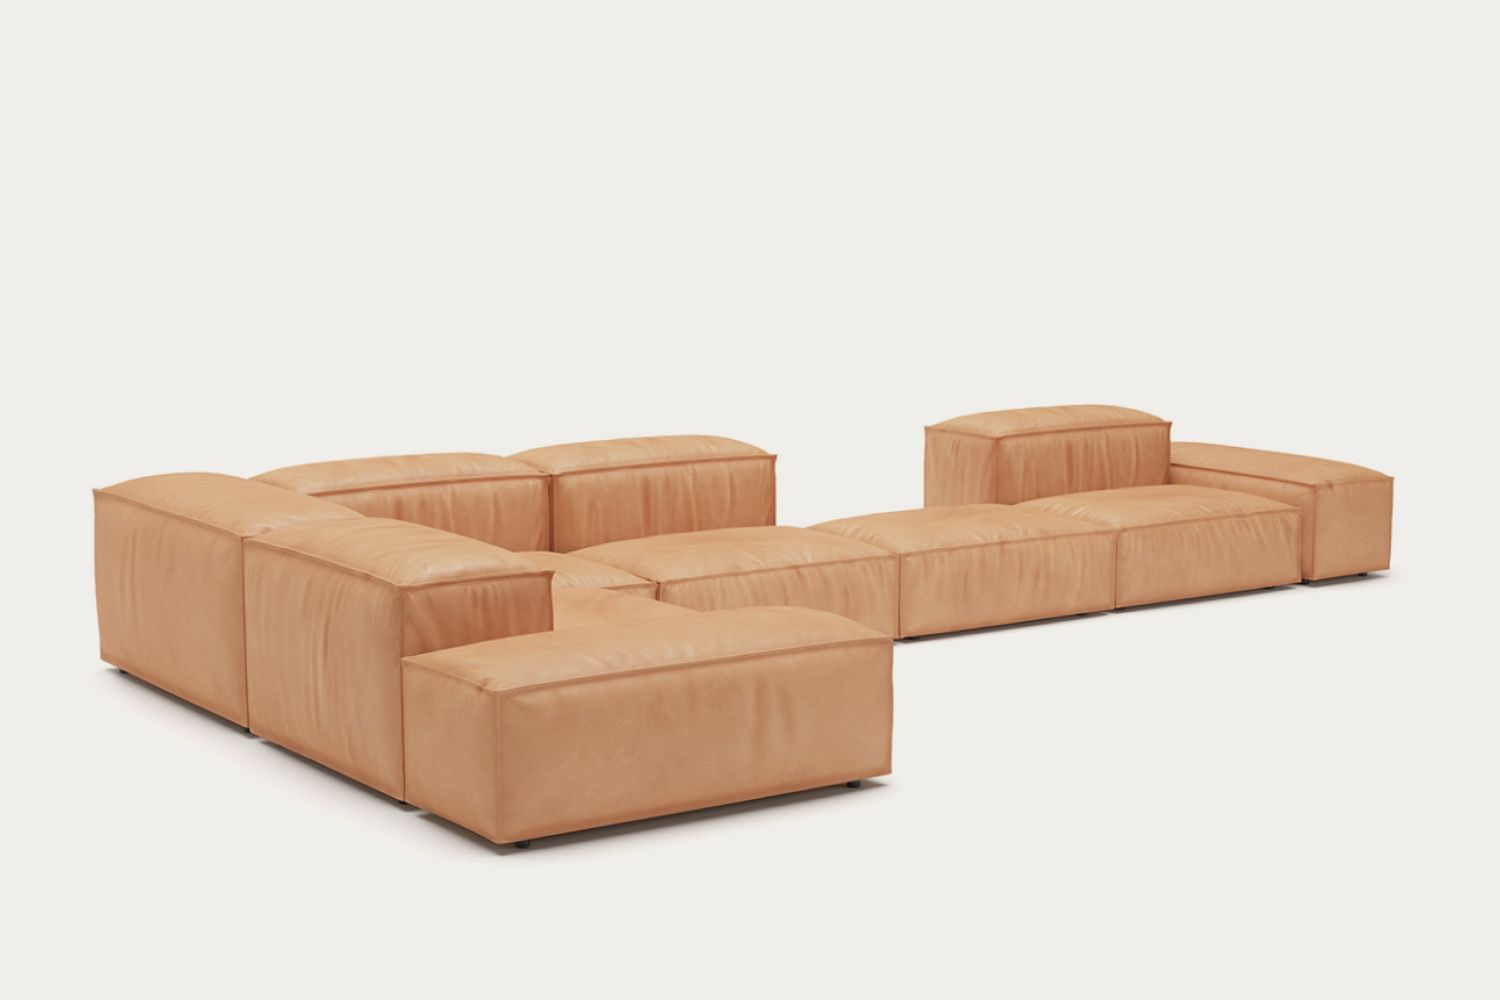 Image of an 'Extrasoft Low Profile Modular Block Sofa | Combination 003' featuring several plush modules in light tan leather. The sofa has a modern, low-to-the-ground design with generous cushioning, creating an inviting and stylish look.